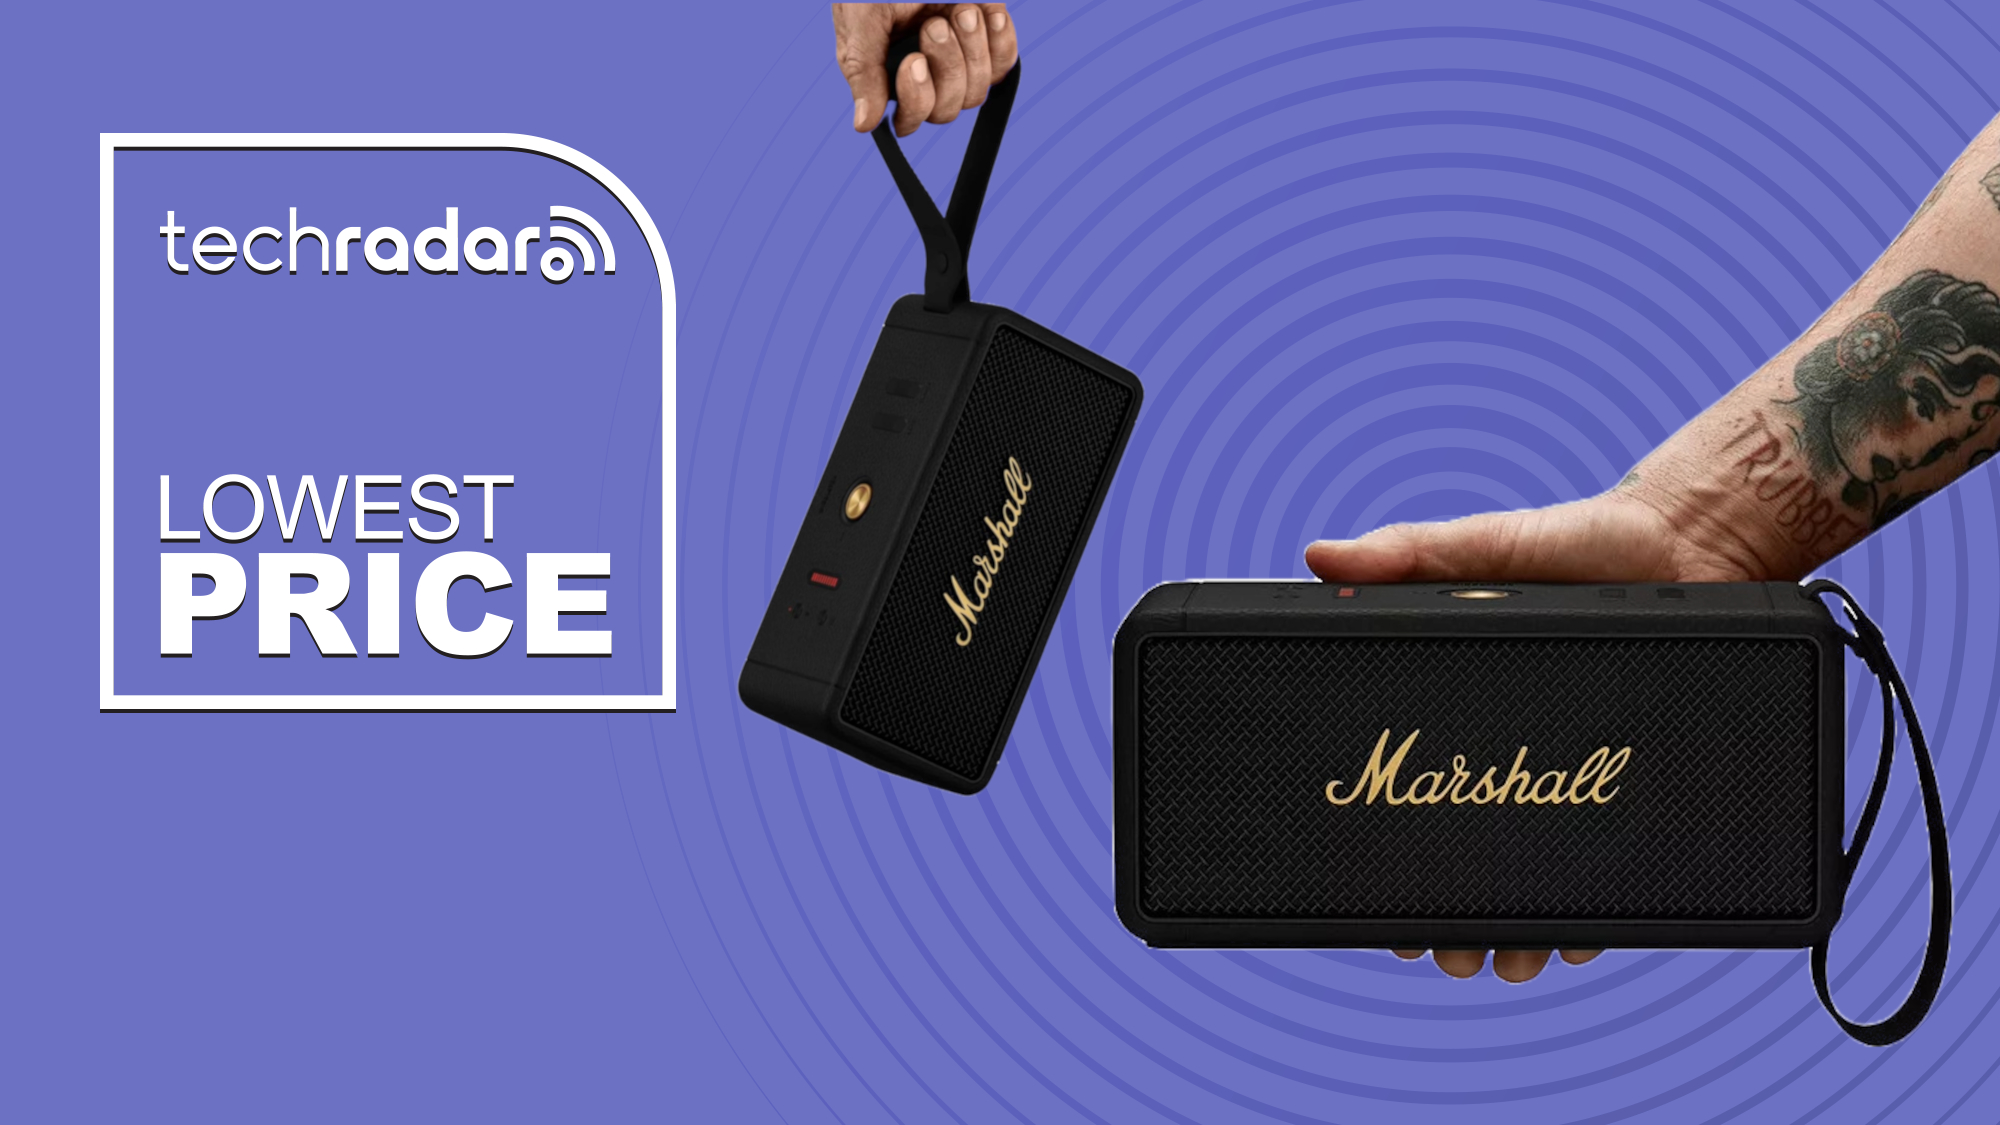 Boom! My favorite Marshall wireless speaker just hit a record-low price ...